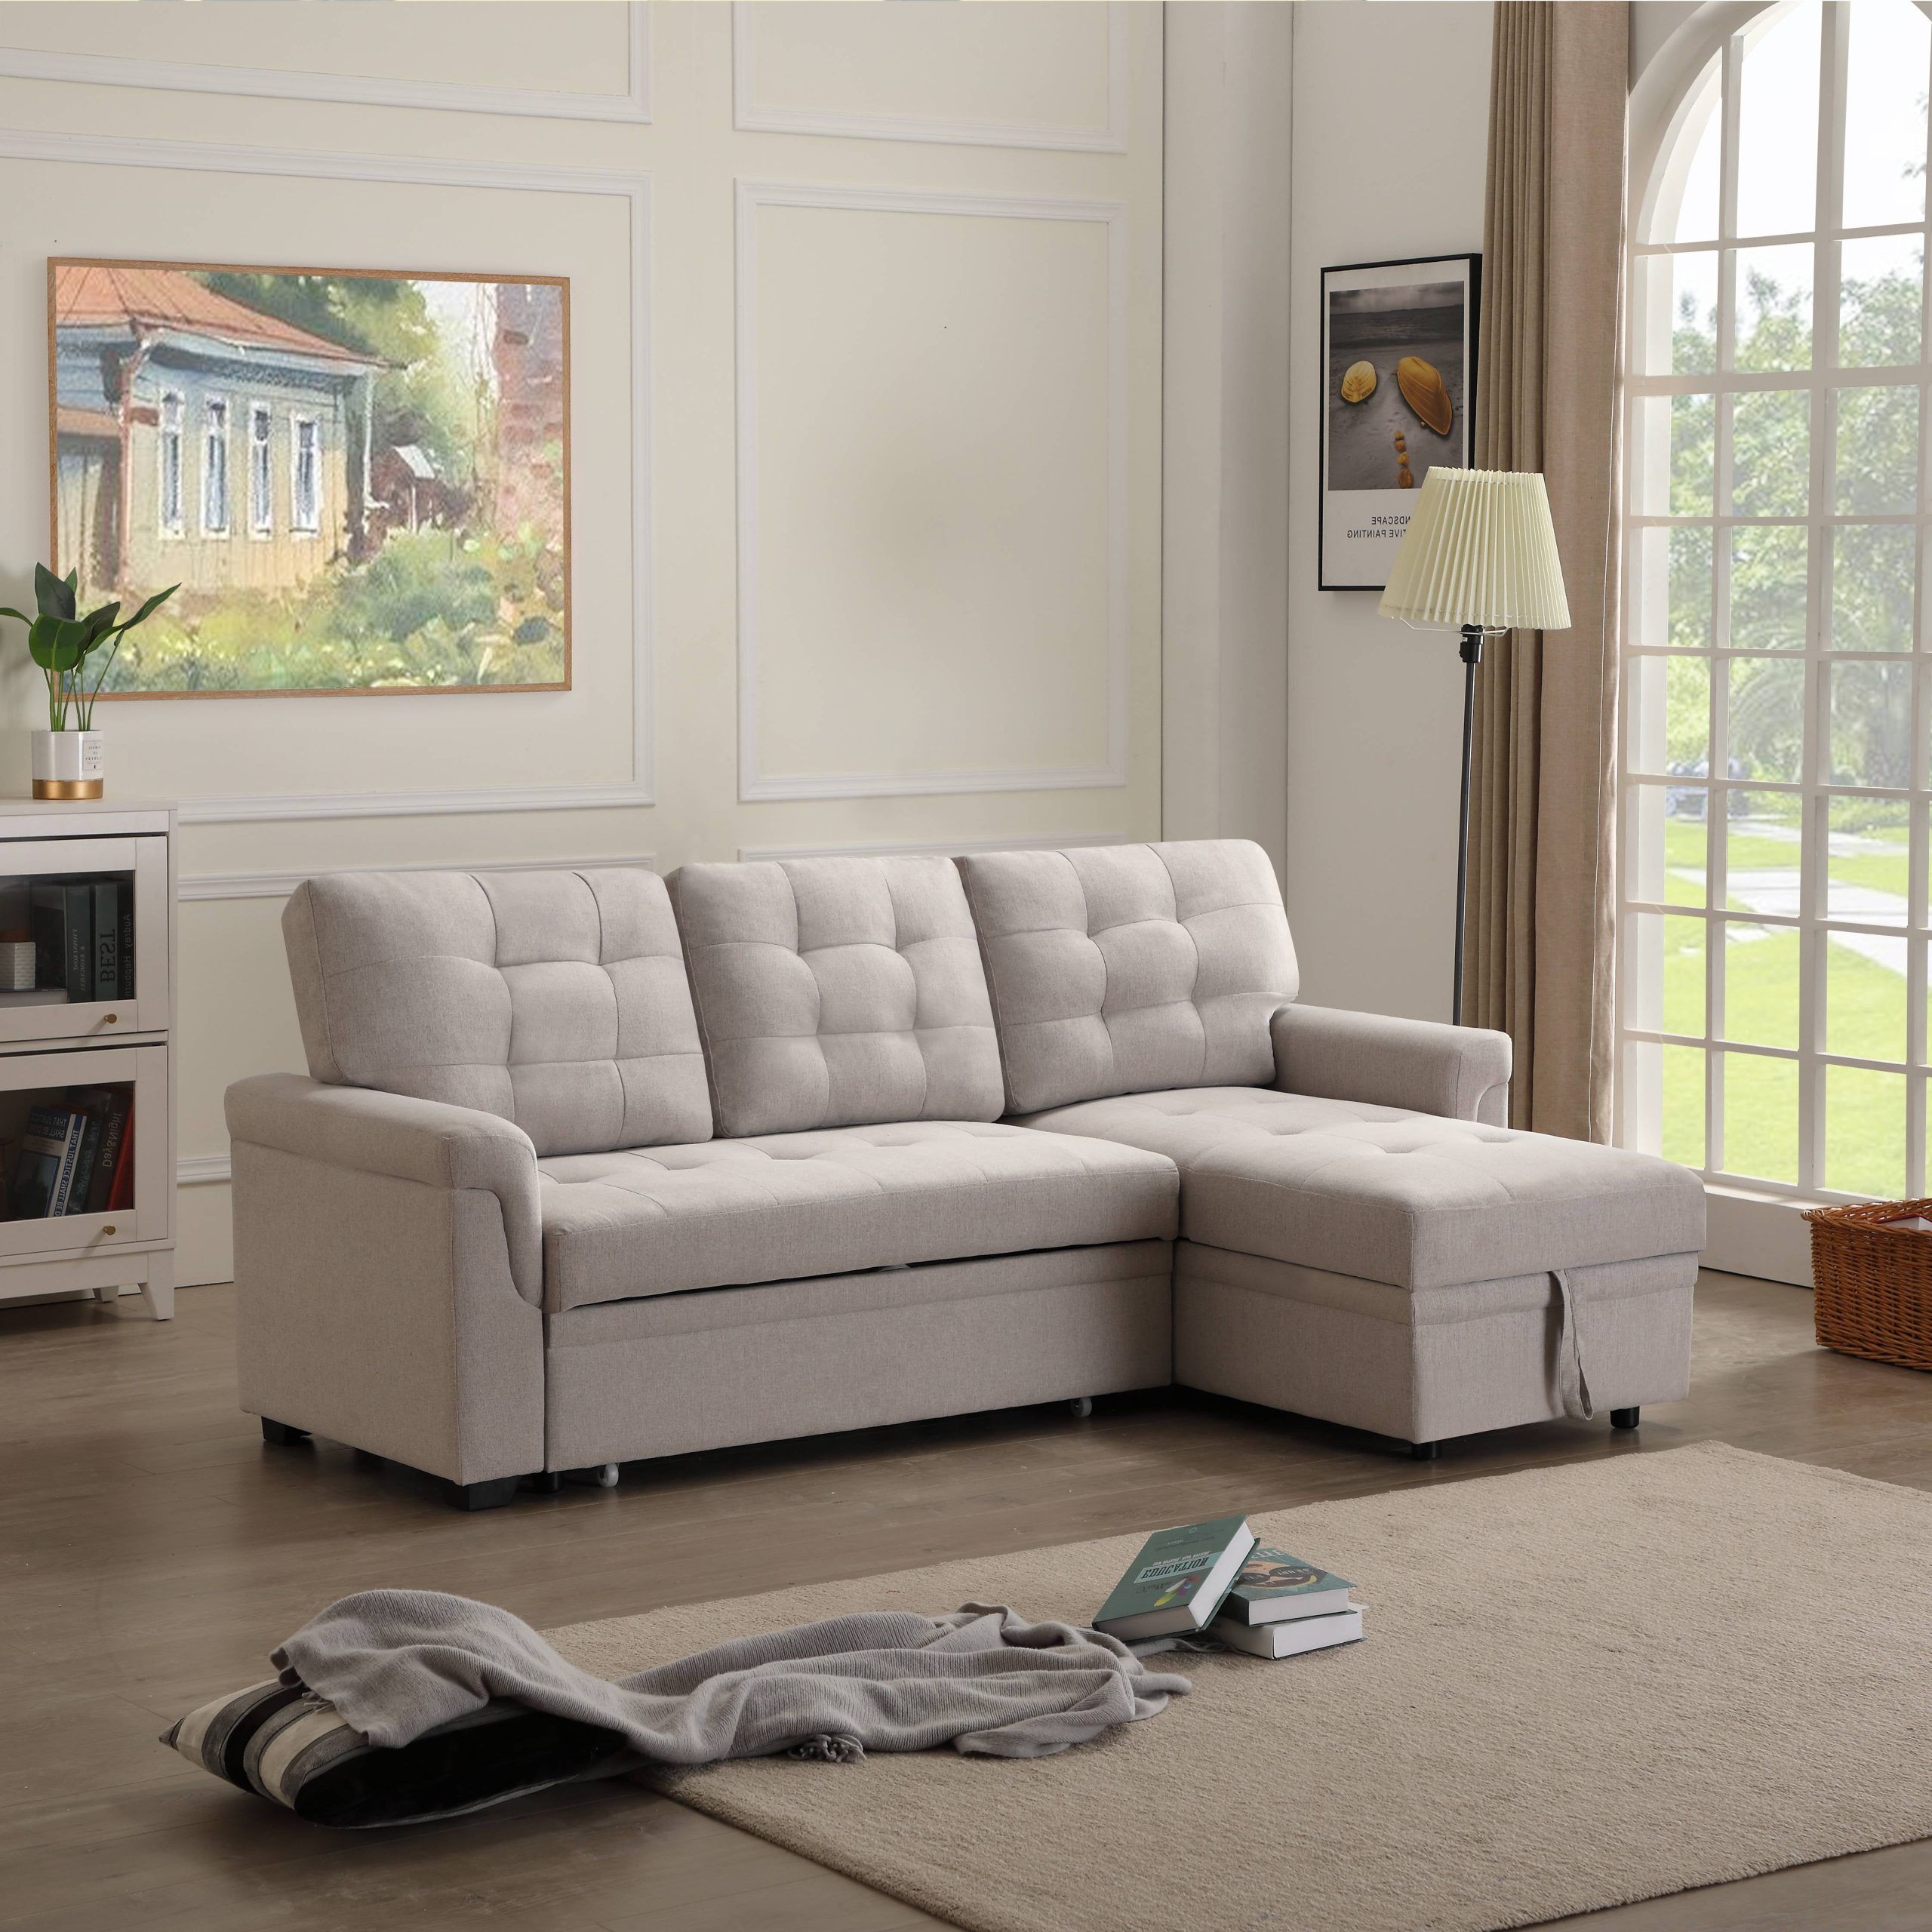 L Shaped Sectional Sofa Bed With Reversible Chaise, 86"w Modern 3 Seat Regarding Beige L Shaped Sectional Sofas (View 7 of 20)